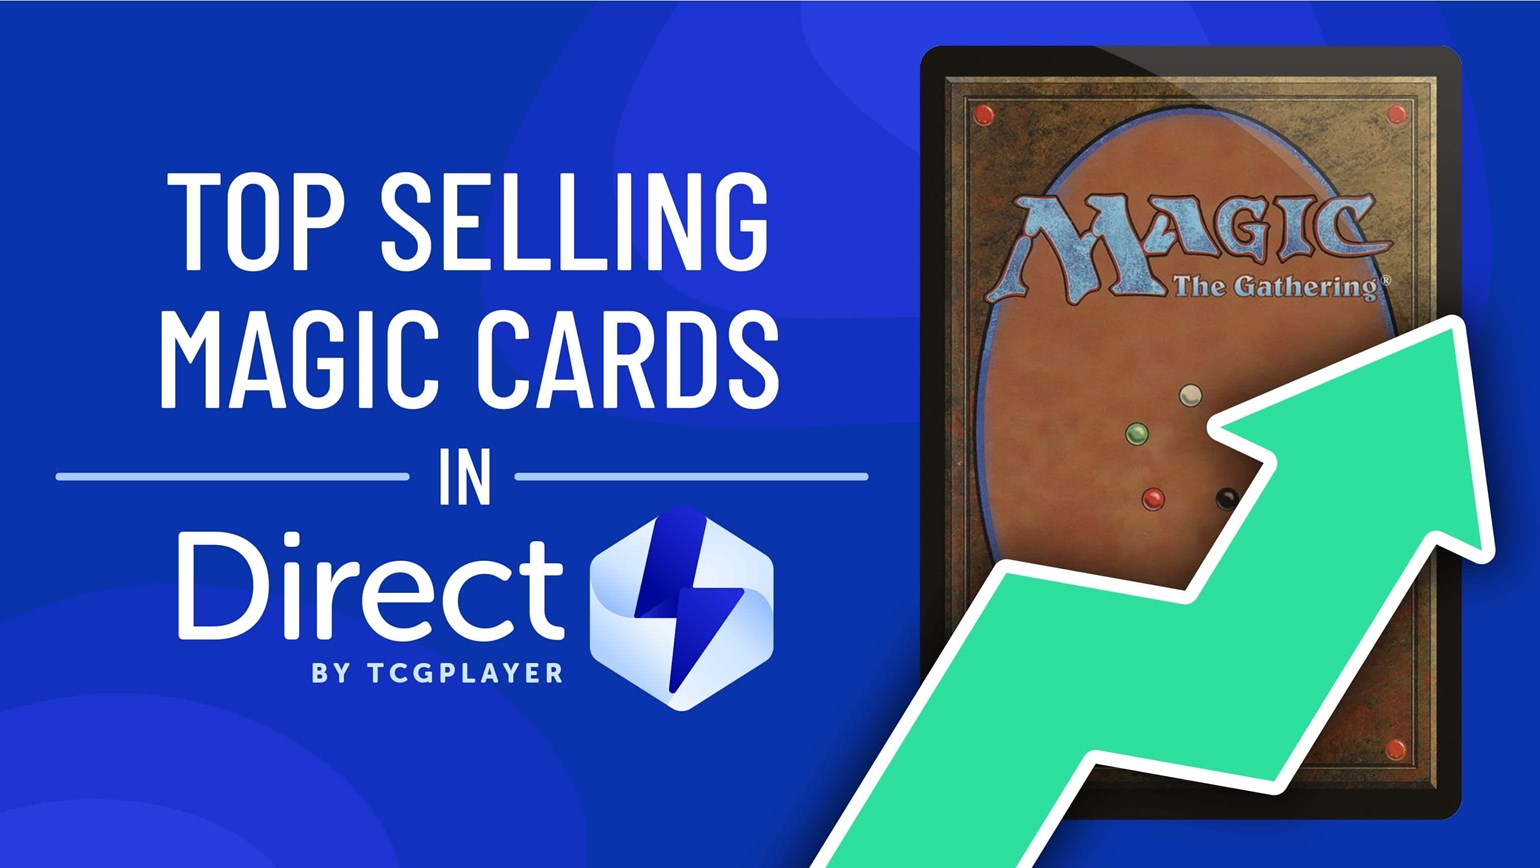 May Top Selling Magic: The Gathering Cards Under $25 in Direct by TCGplayer